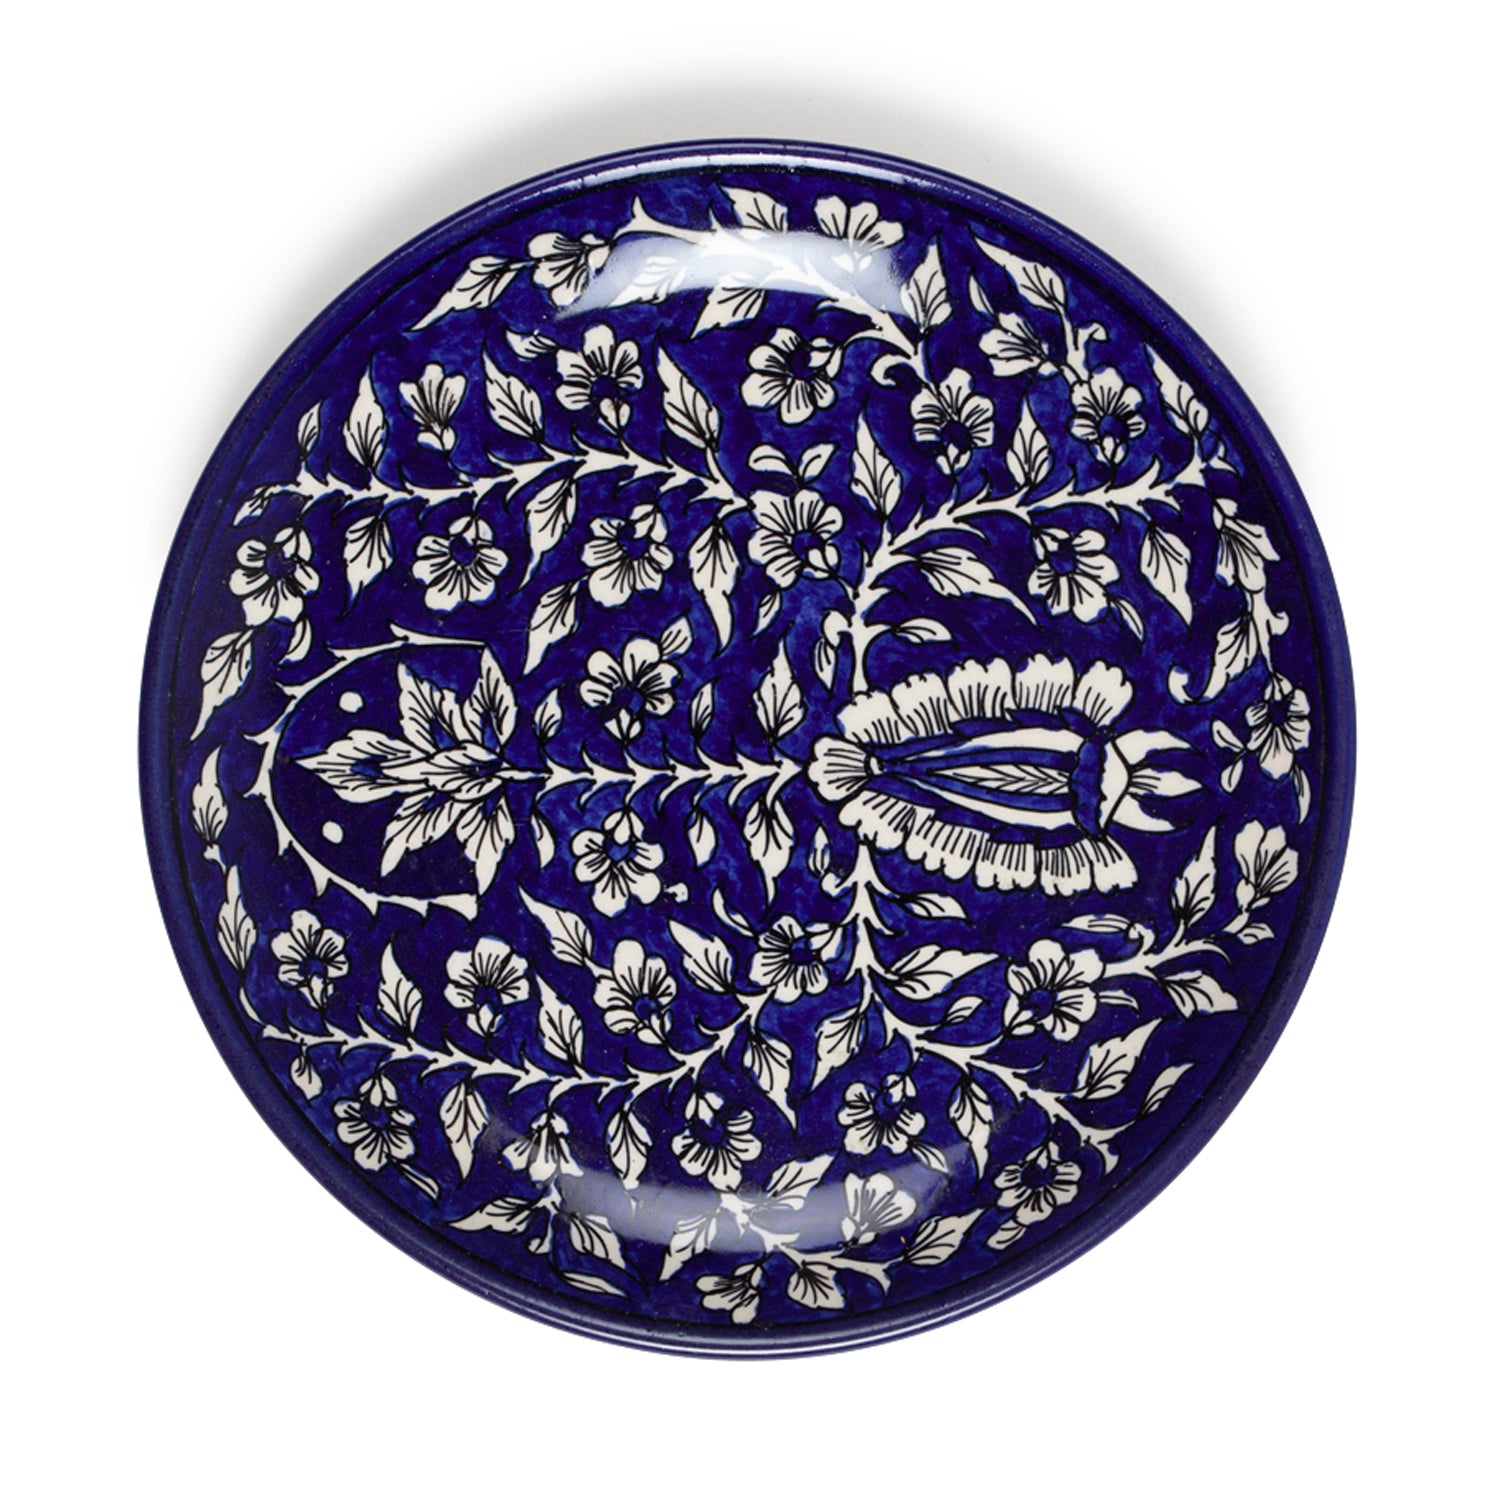 Hand Painted Ceramic Plate - 10"